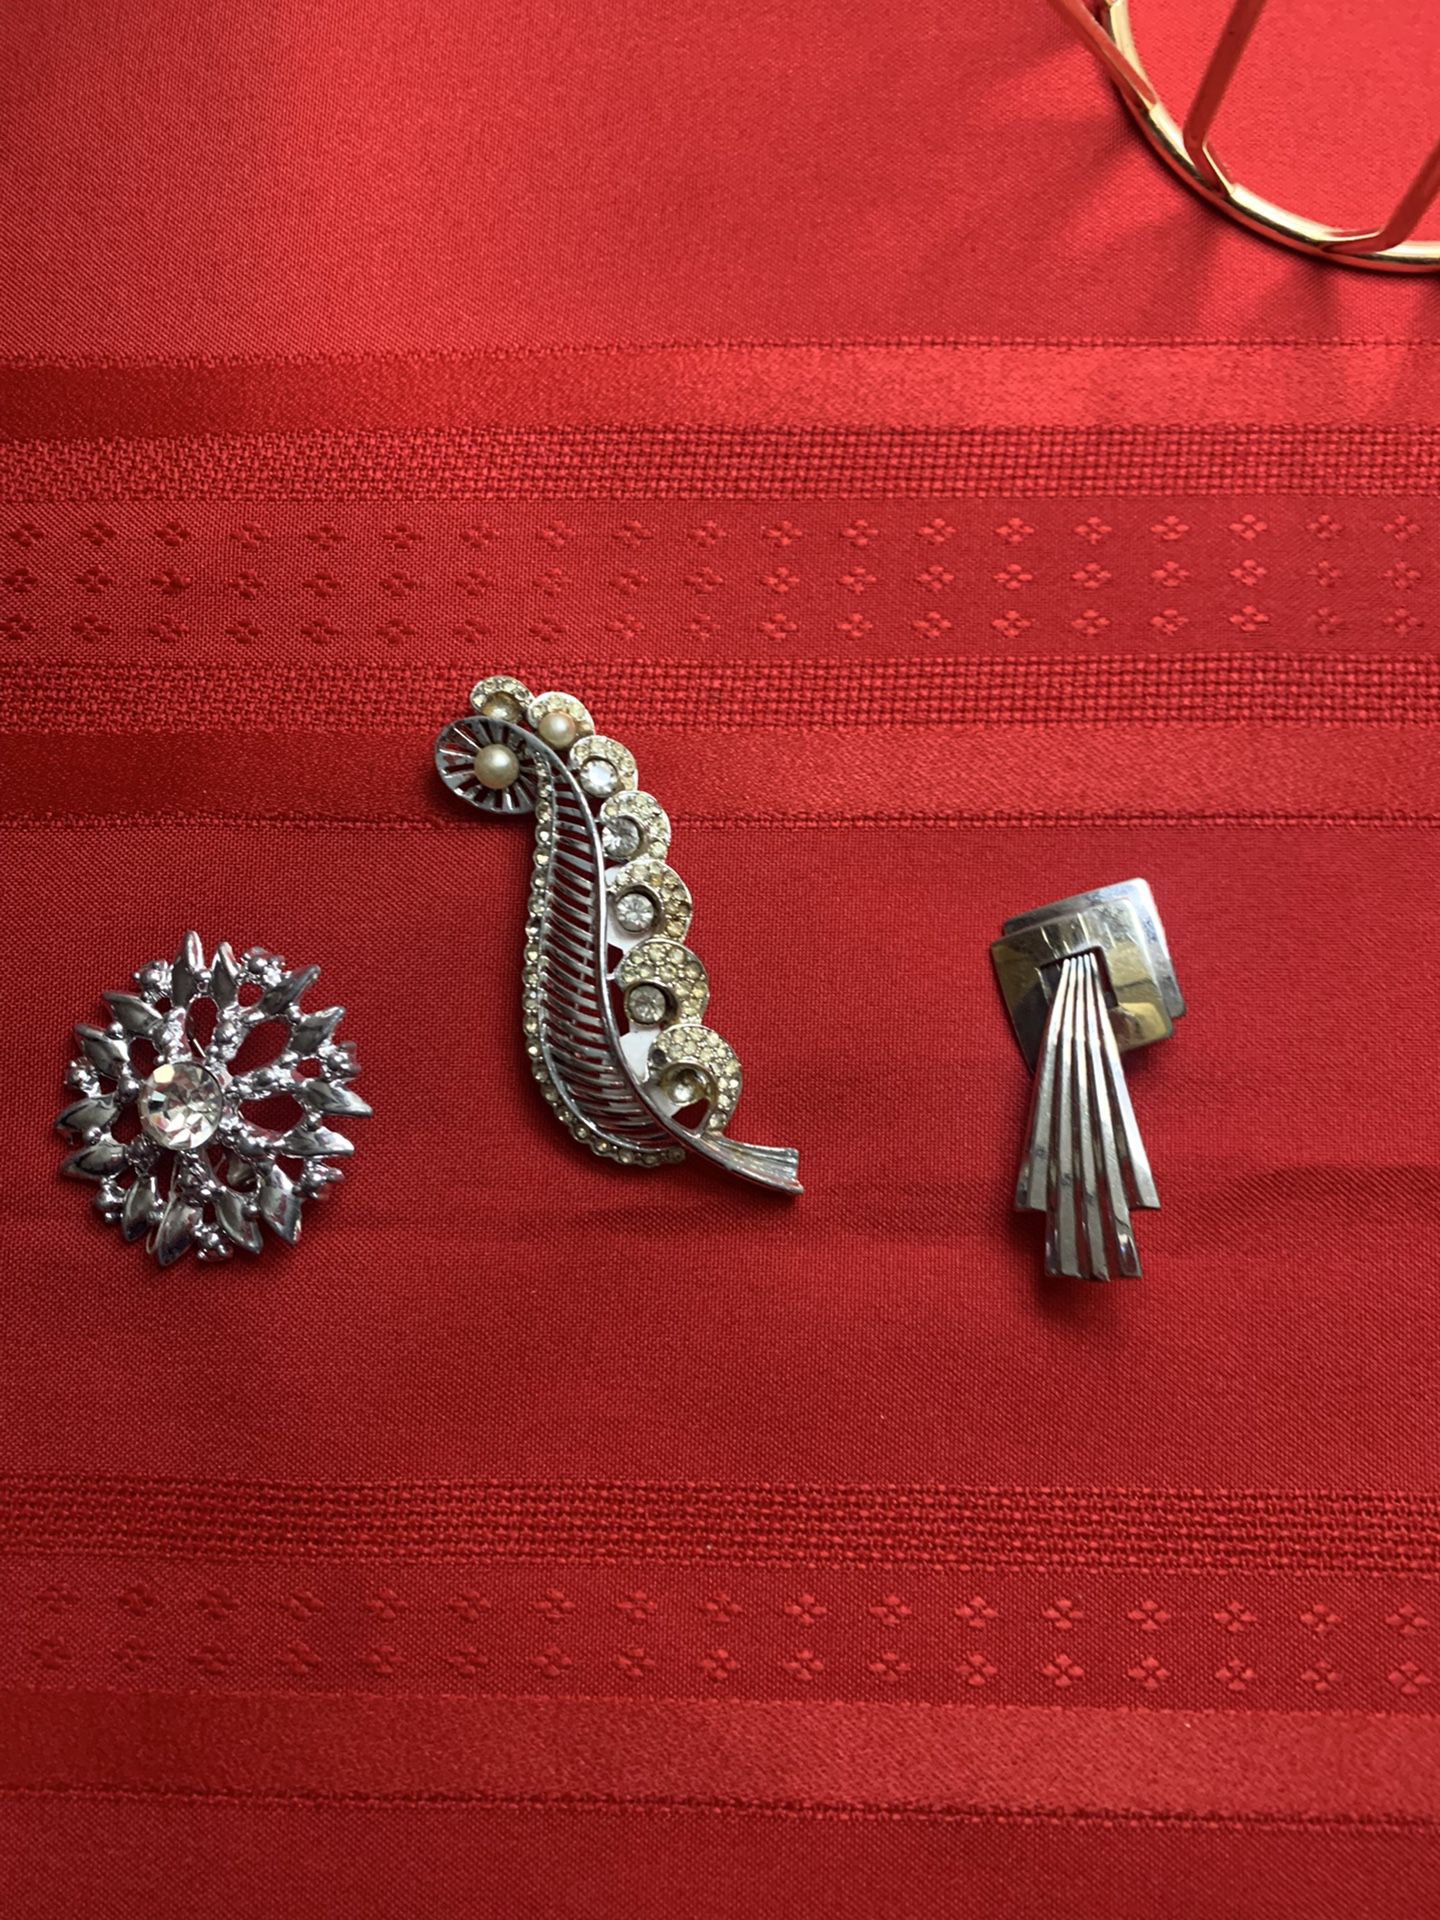 3 Silver Tone Brooches 